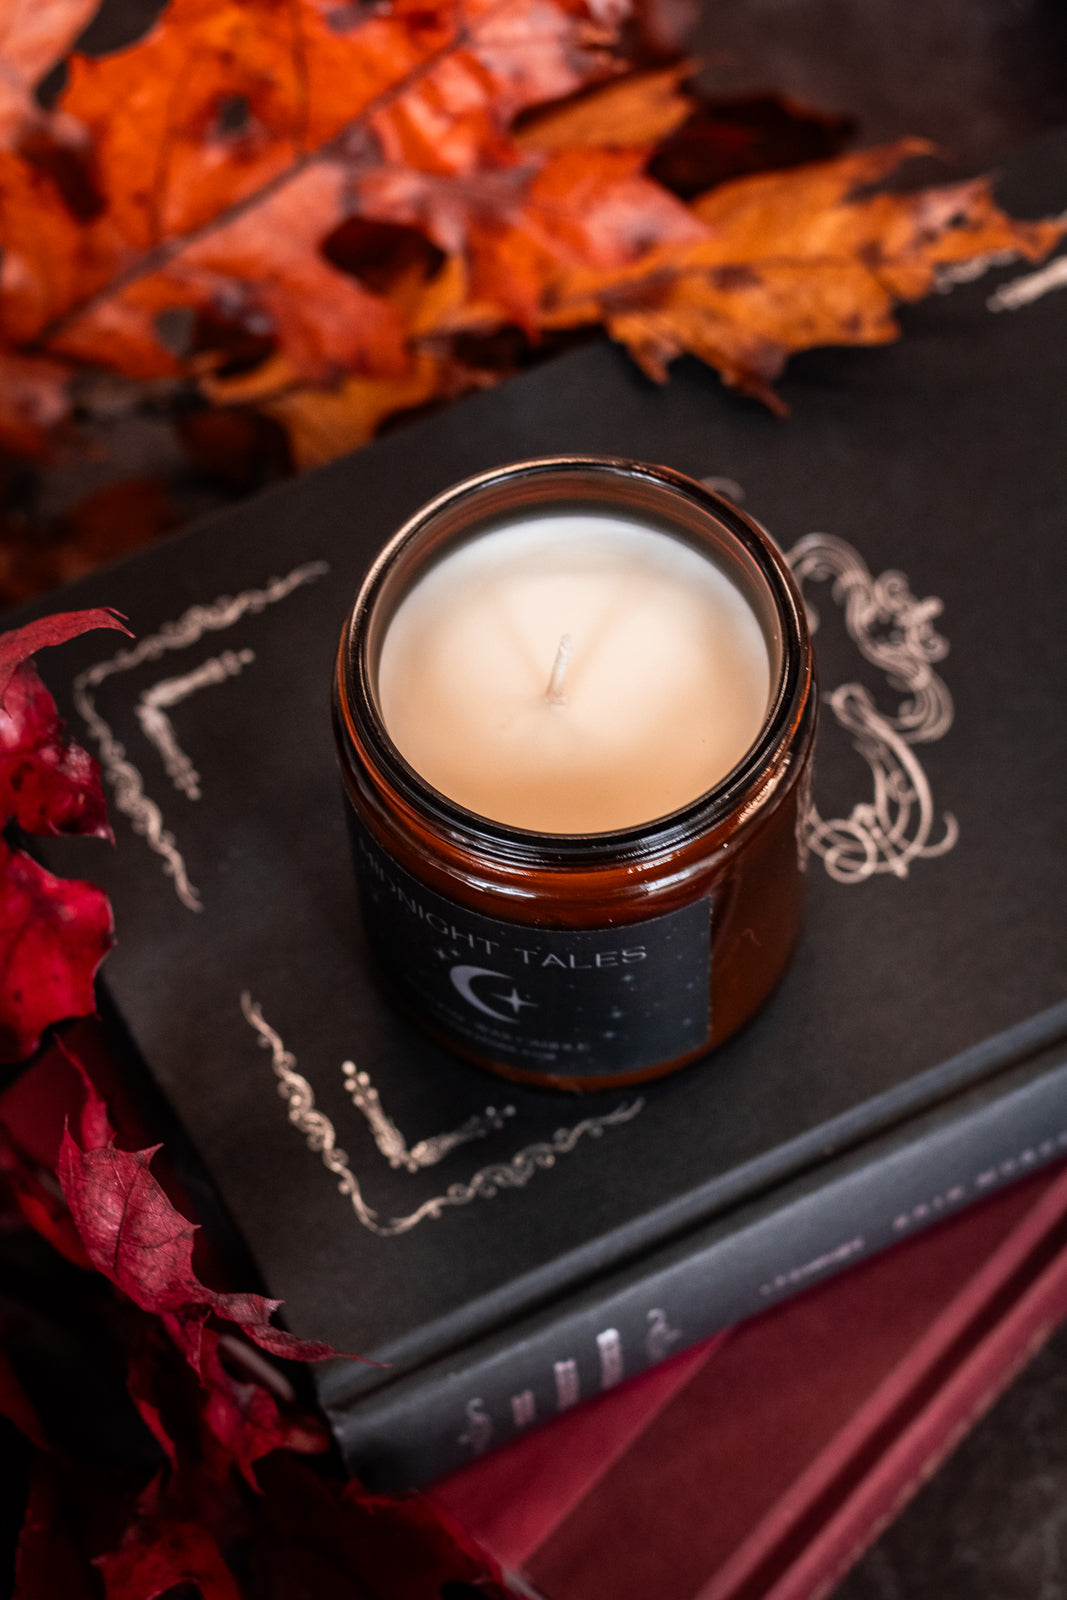 Midnight Tales Candle